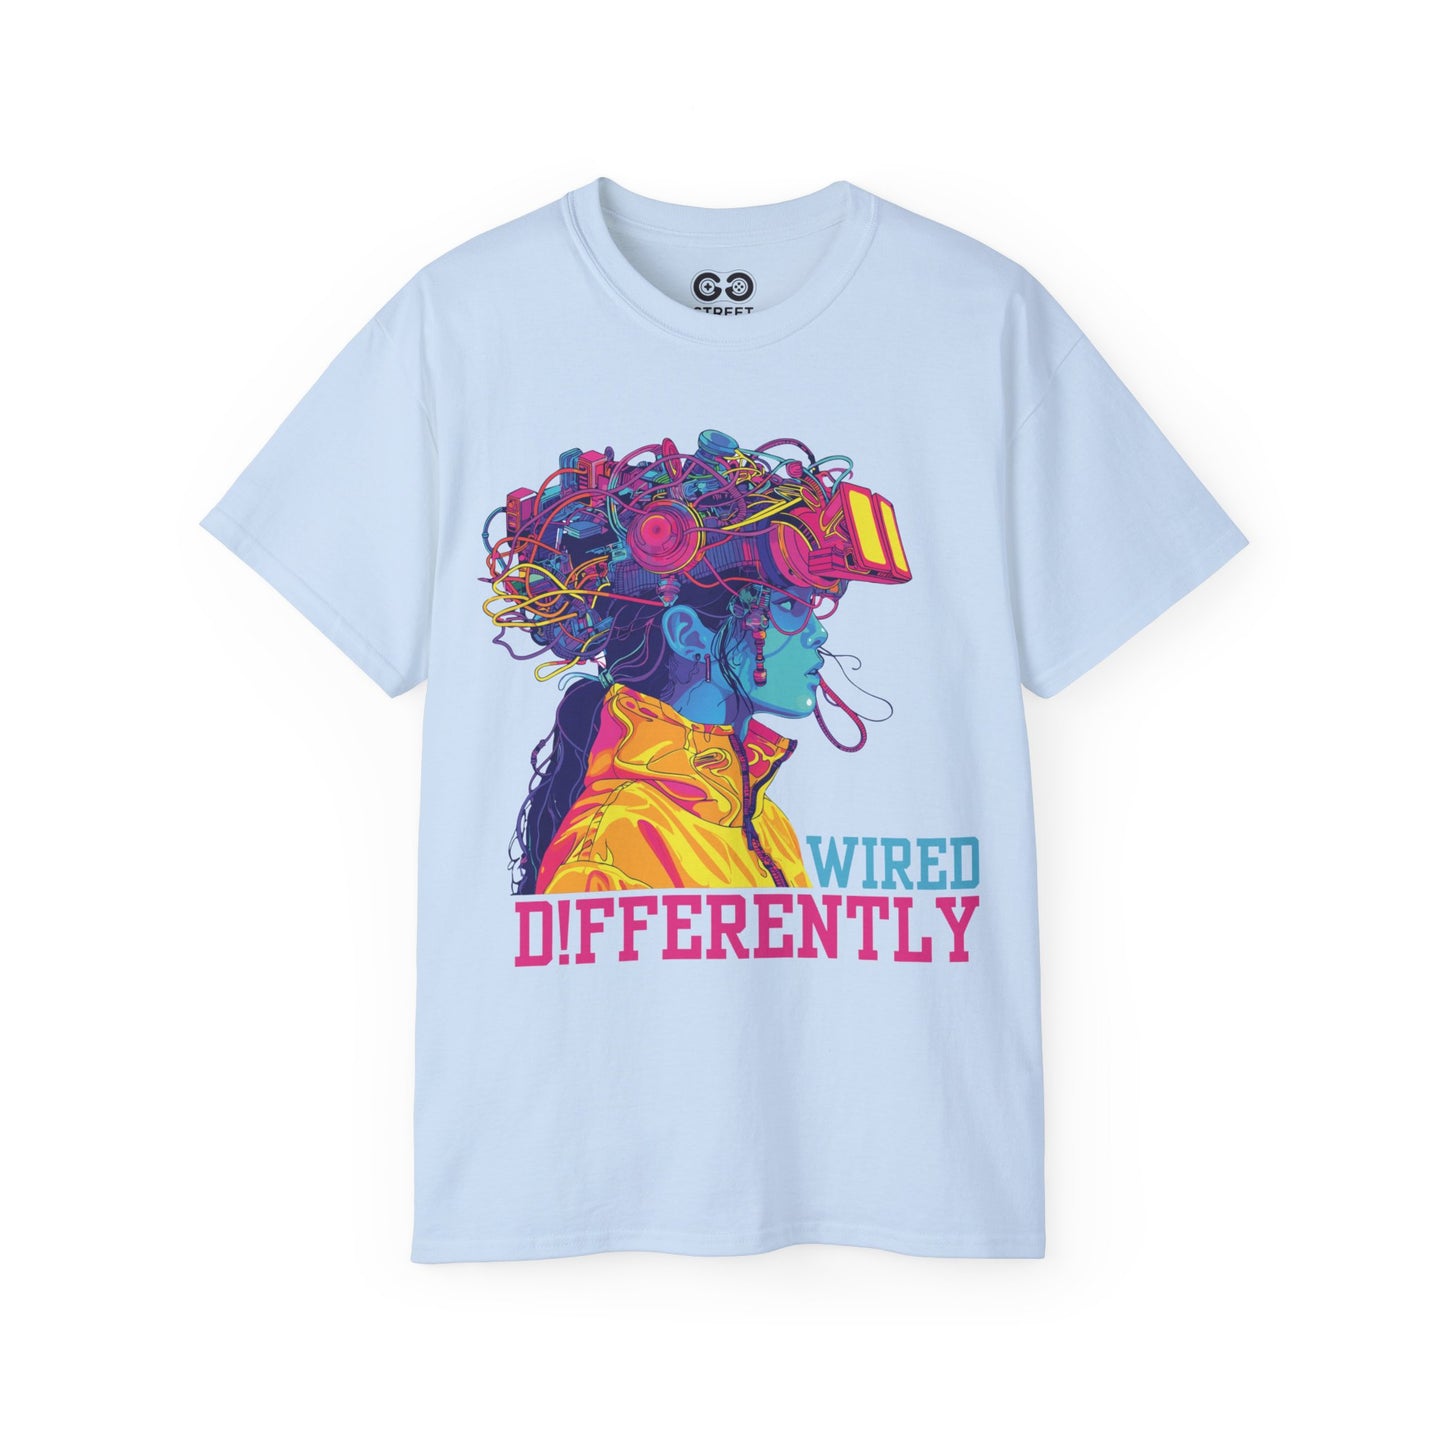 D!FFERENTLY WIRED - Unisex Ultra Cotton Tee